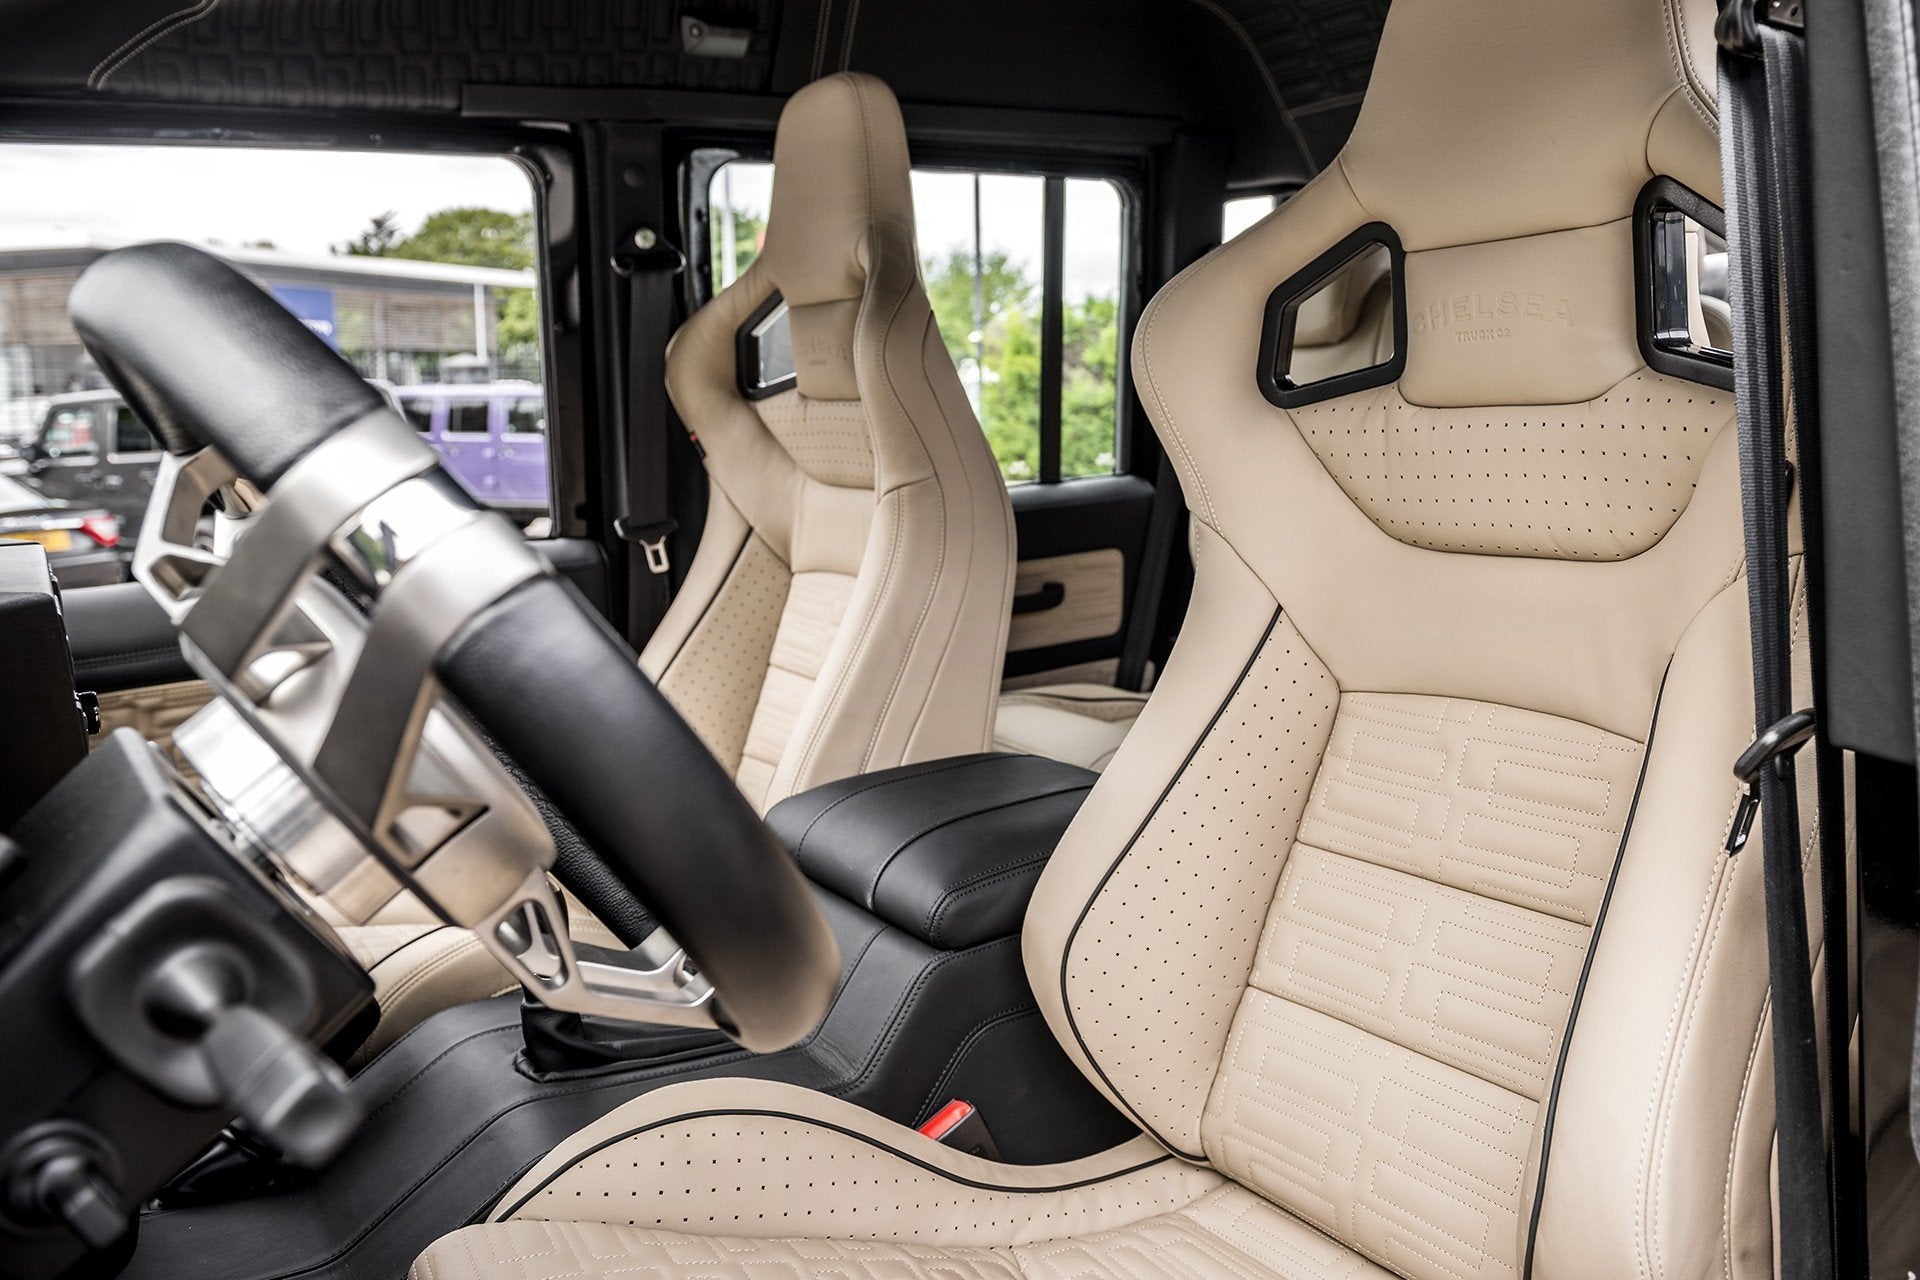 Land Rover Defender 110 (1991-2016) Leather Interior by Chelsea Truck Company - Image 1506